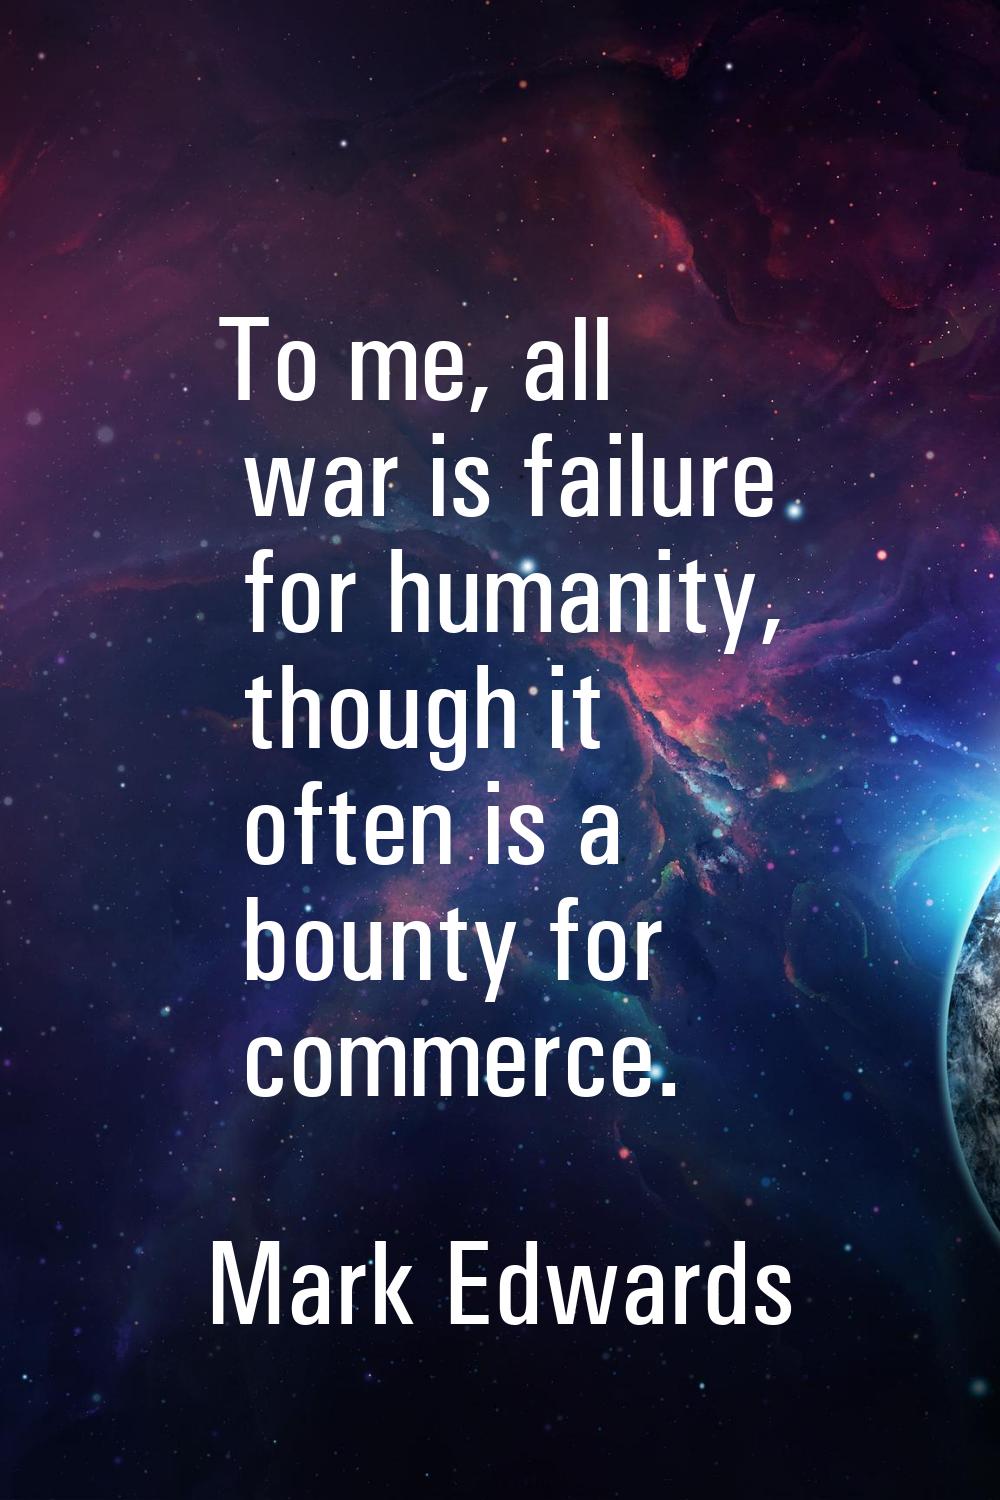 To me, all war is failure for humanity, though it often is a bounty for commerce.